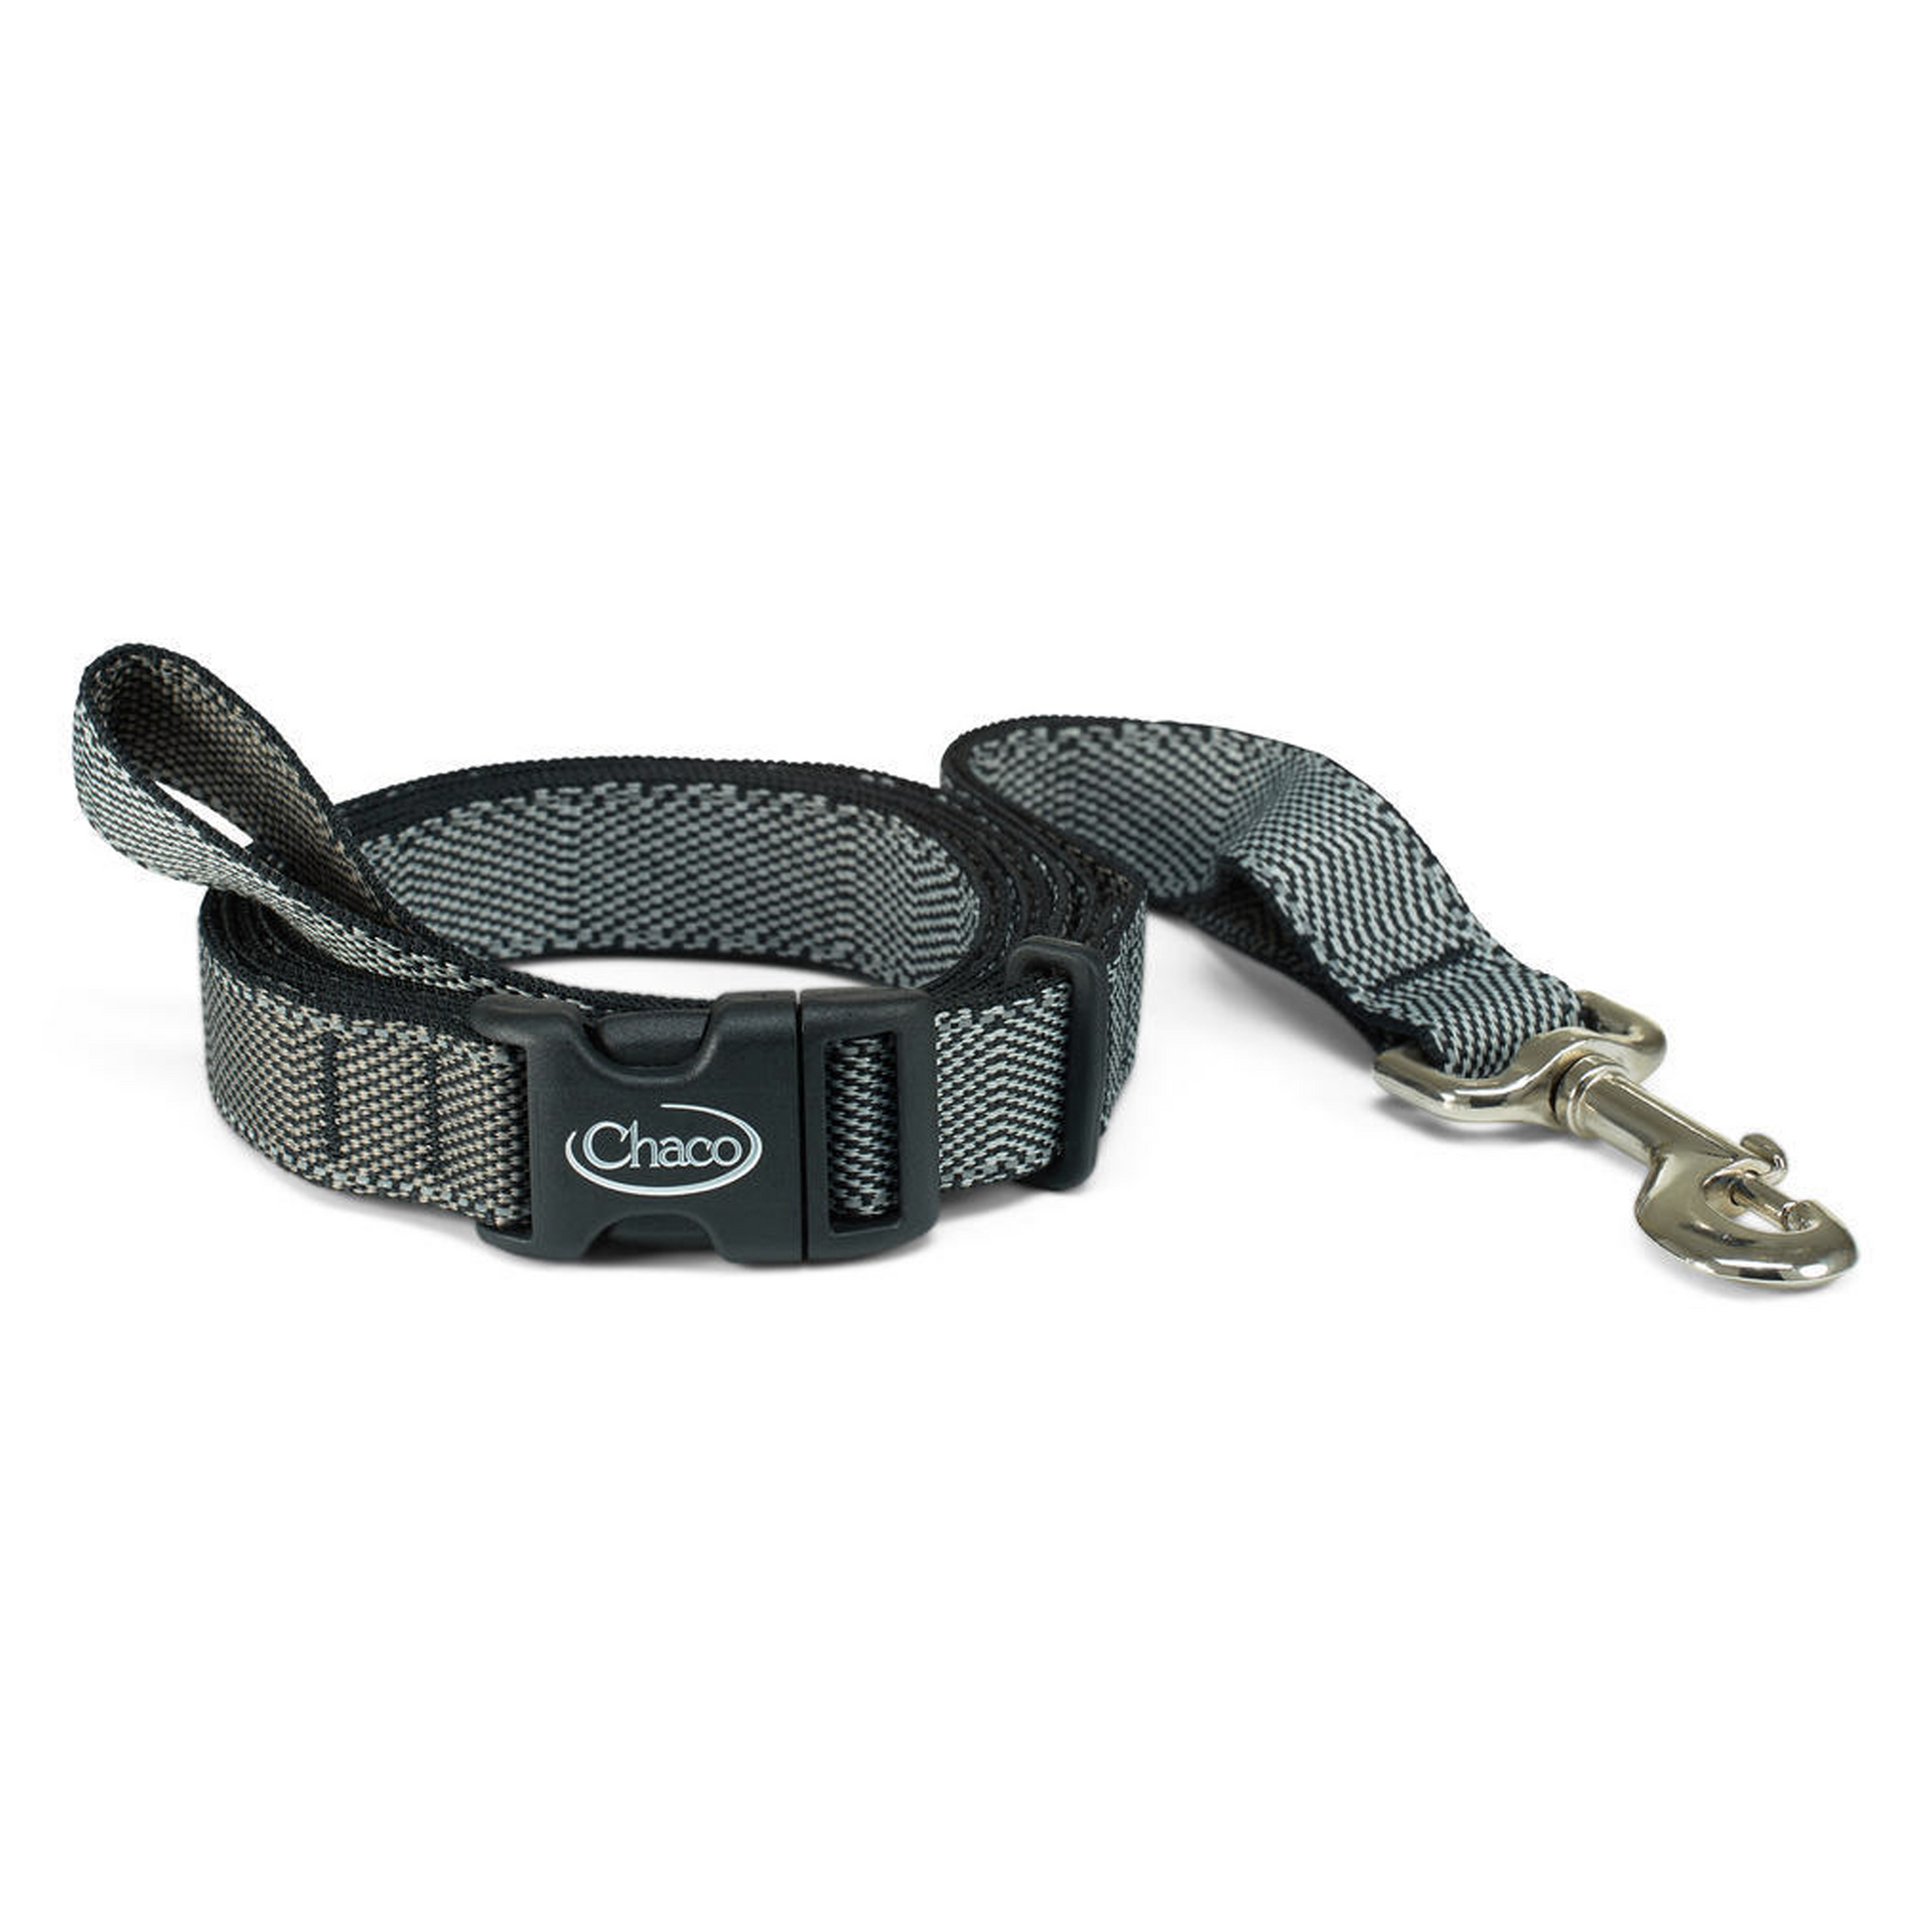 Chaco Dog Leash Big Adventure Outfitters